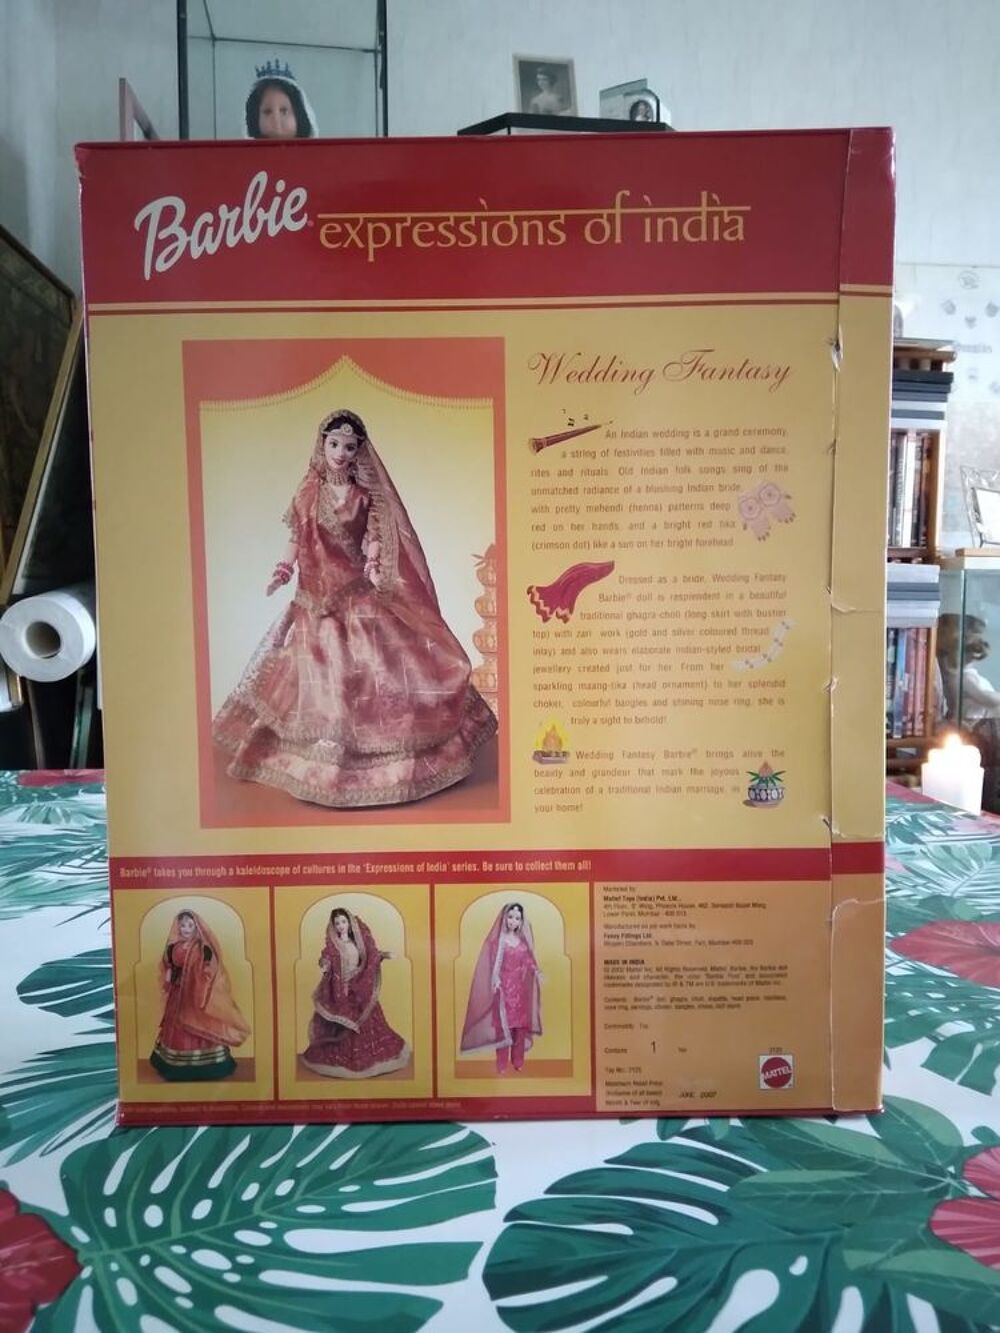 Barbie - Expressions of India - Wedding Fantasy 
Jeux / jouets